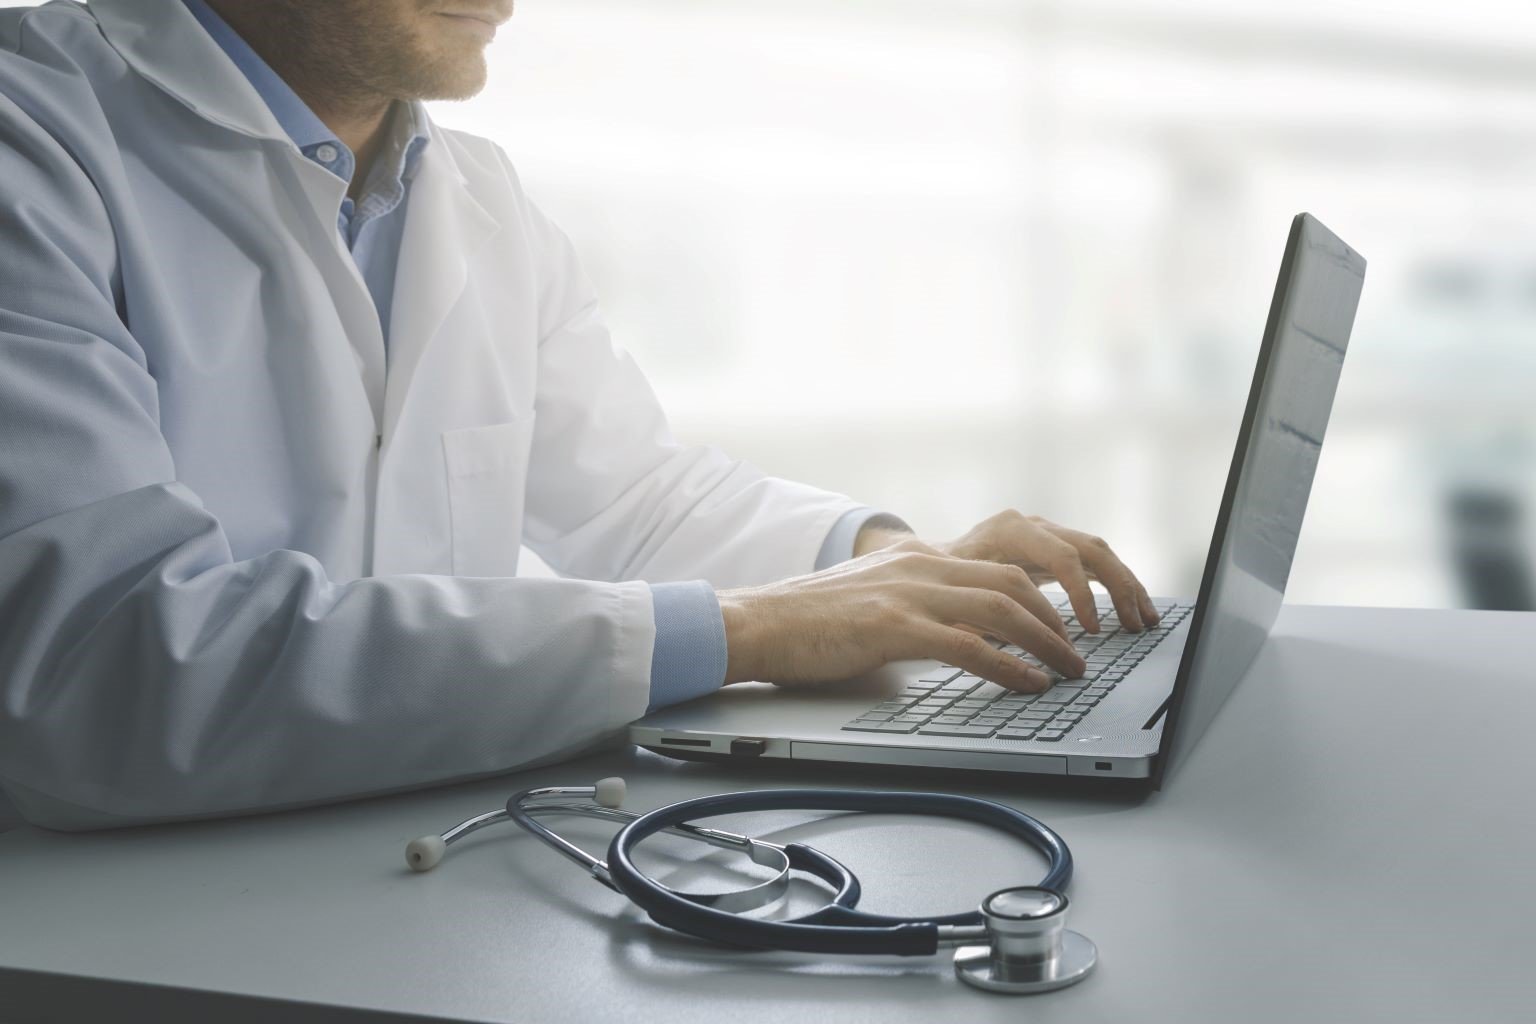 Male doctor typing on laptop at desk.